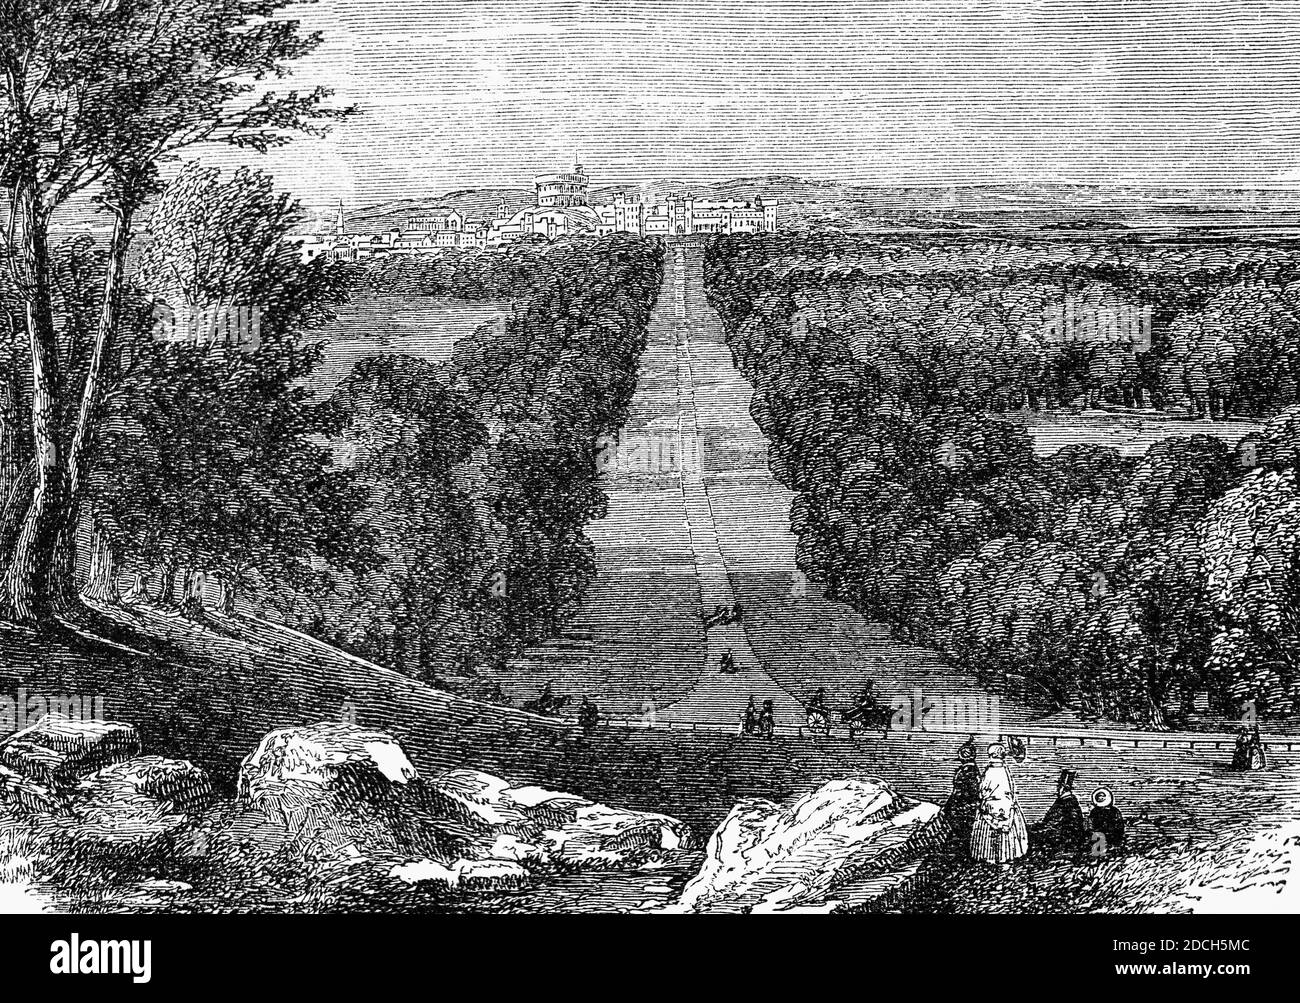 A 19th Century view across Windsor Park, and up the Long walk to Windsor Castle originally built in the 11th century after the Norman invasion of England by William the Conqueror. Since the time of Henry I, it has been used by the reigning monarch and is the longest-occupied palace in Europe, Berkshire, England Stock Photo